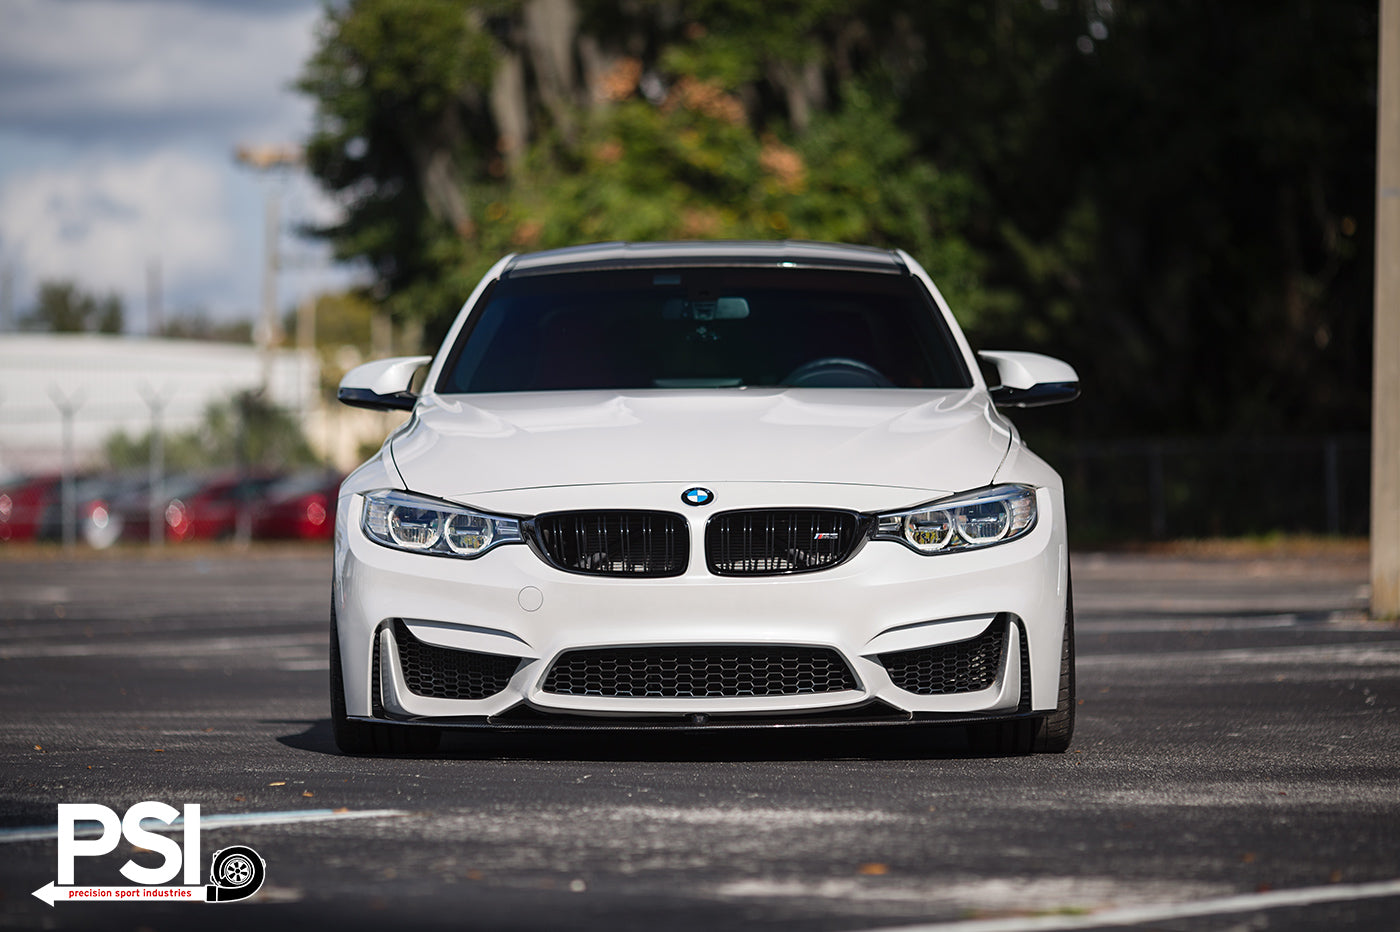 The Obsessed Garage F80 M3 by PSI